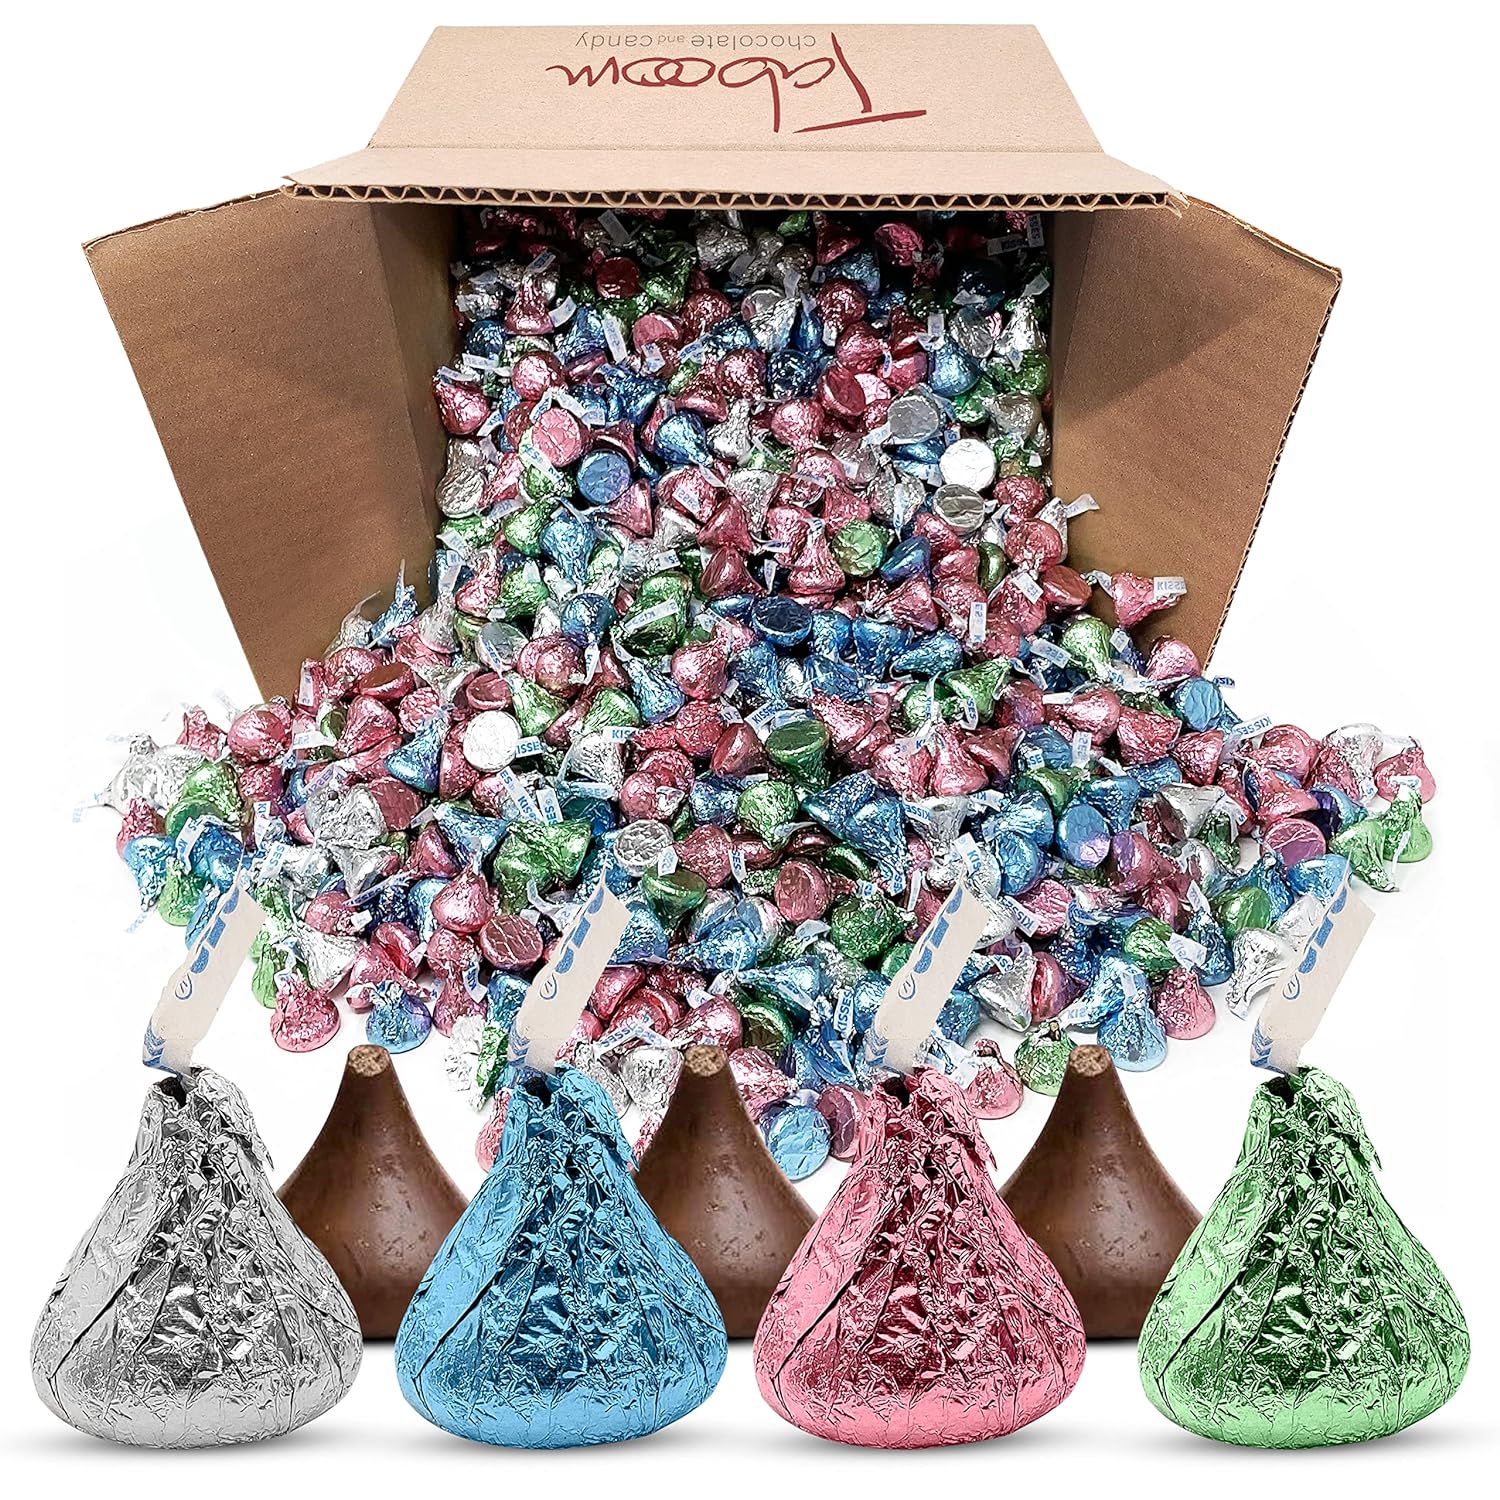 HersheyKisses Bulk Easter Basket Stuffers – 4.2 Pounds Pastel Easter Eggs HersheyMiniatures Assortment – Delicious Milk Chocolate Candy for Office, Kids, Parties, Holiday Easter Treats